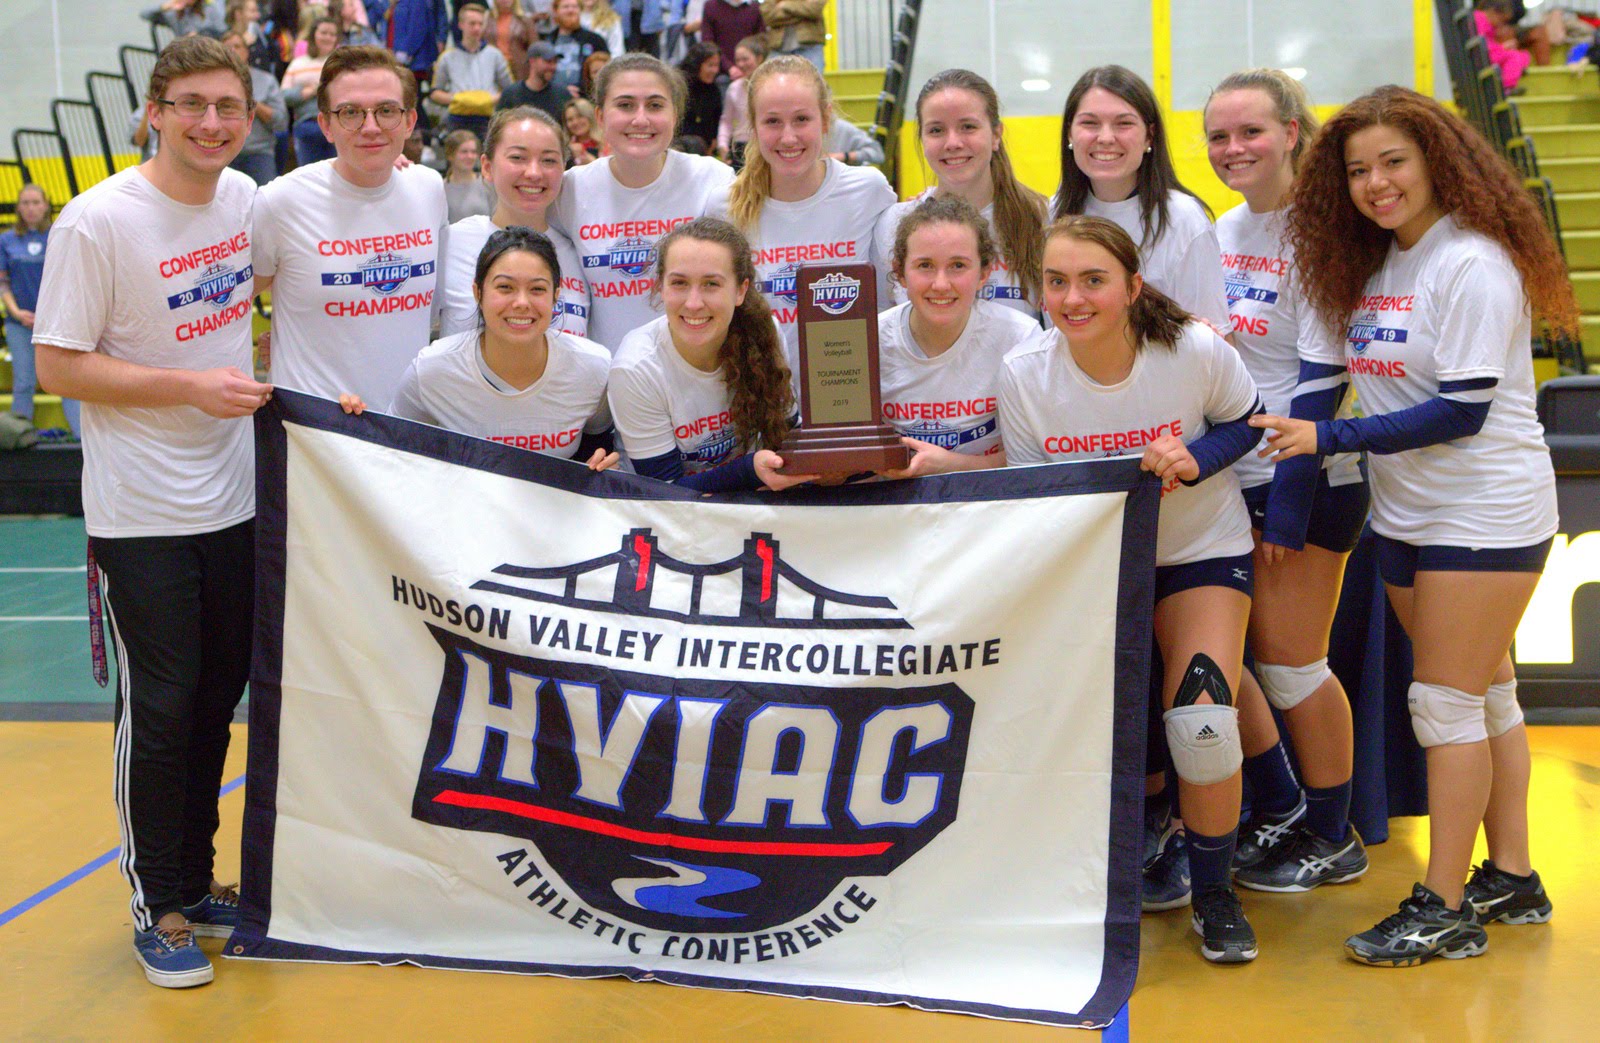 The King's College Wins First Women's Volleyball Title